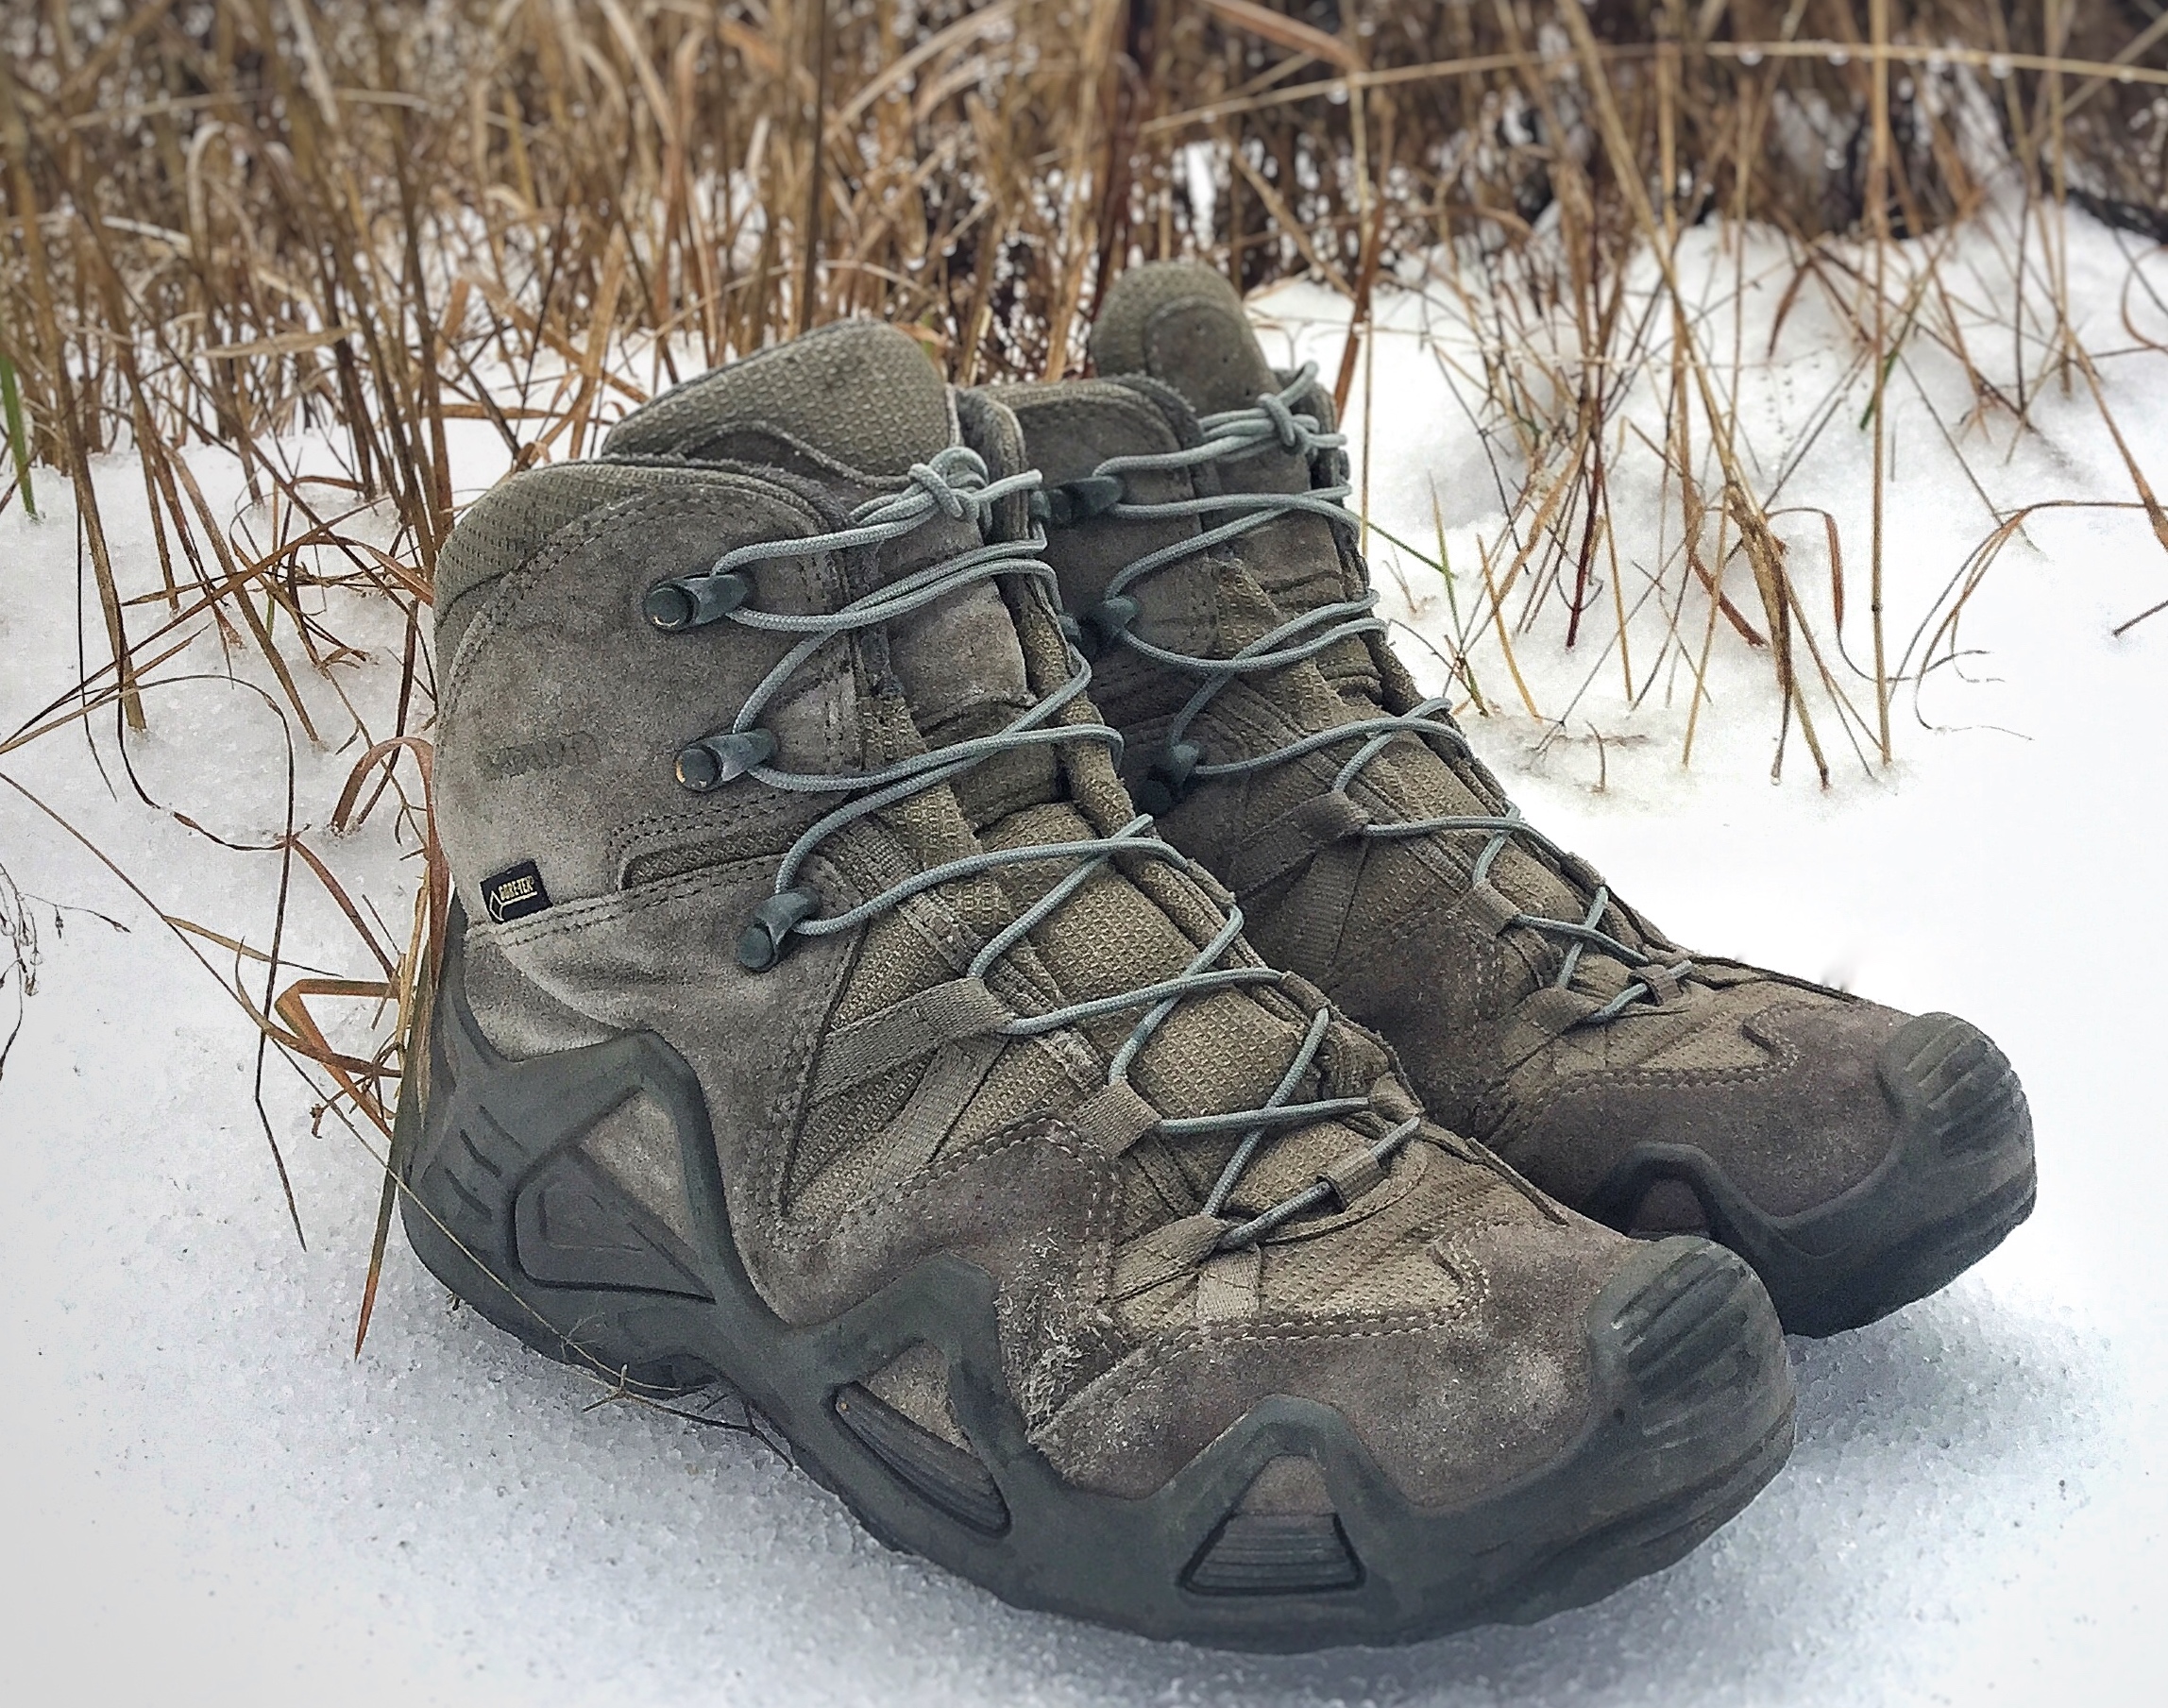 Lowa Zephyr Boots - Review After 7 Years Use |